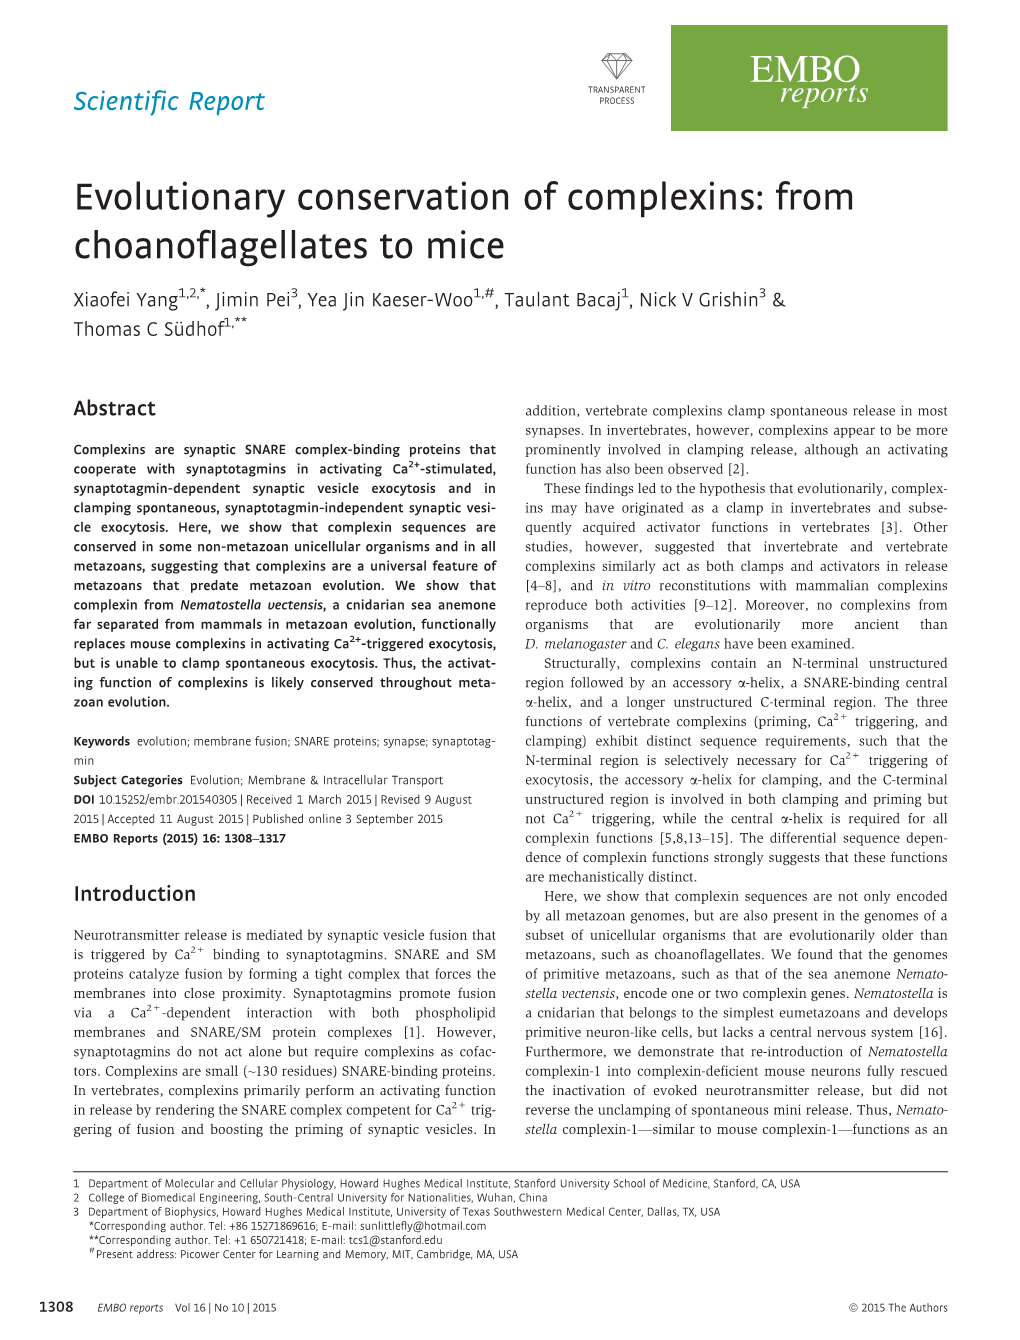 Evolutionary Conservation of Complexins: from Choanoflagellates to Mice